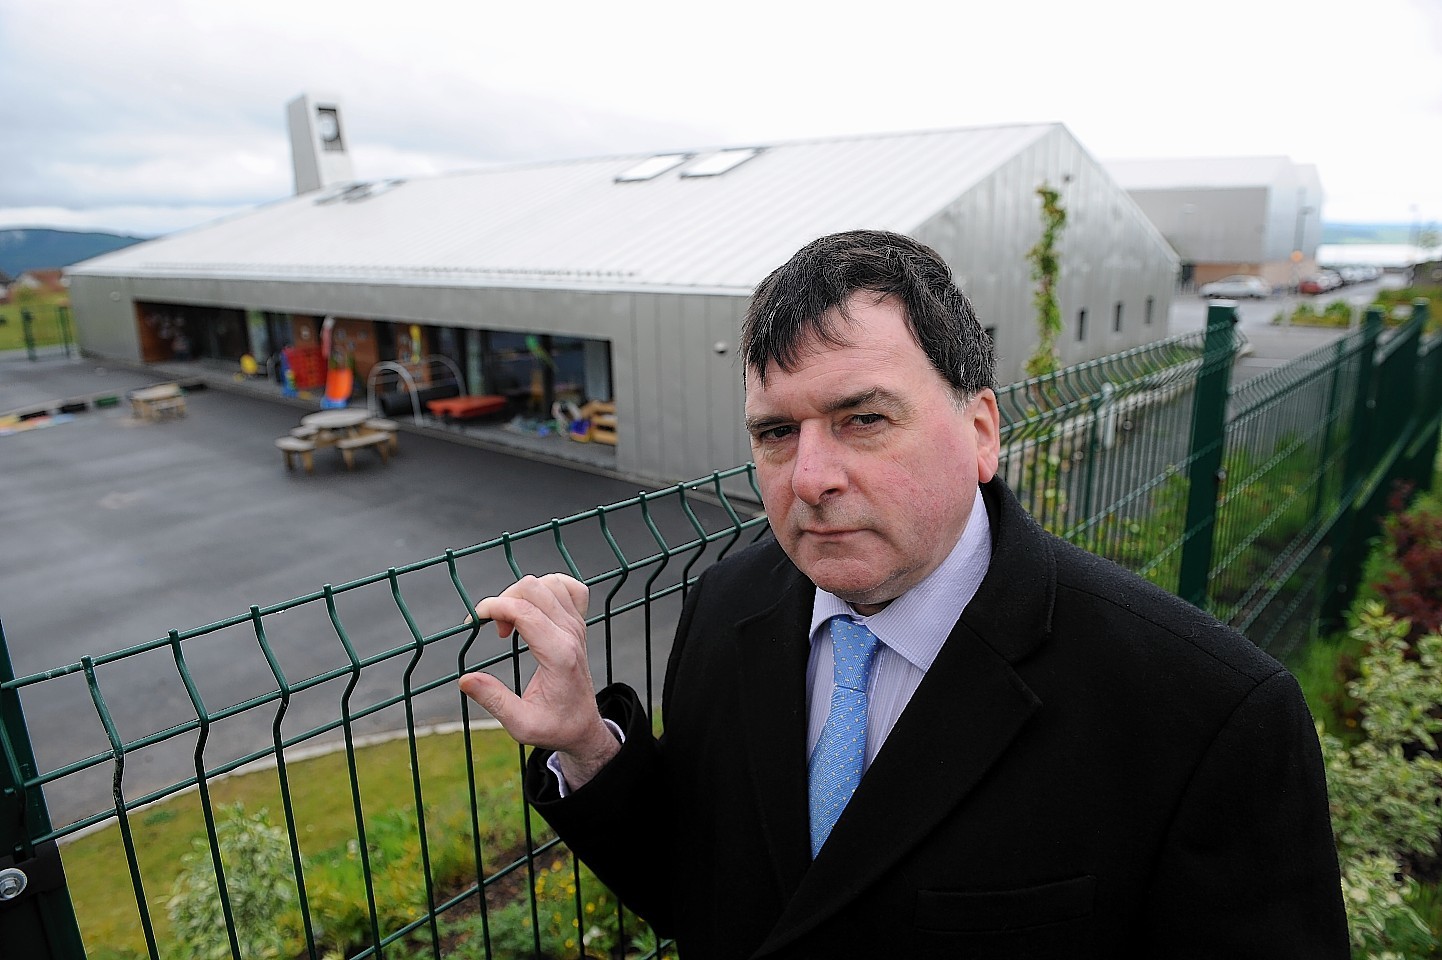 Councillor Ken Gowans is unaware of any problems with the "fabric" of the school.